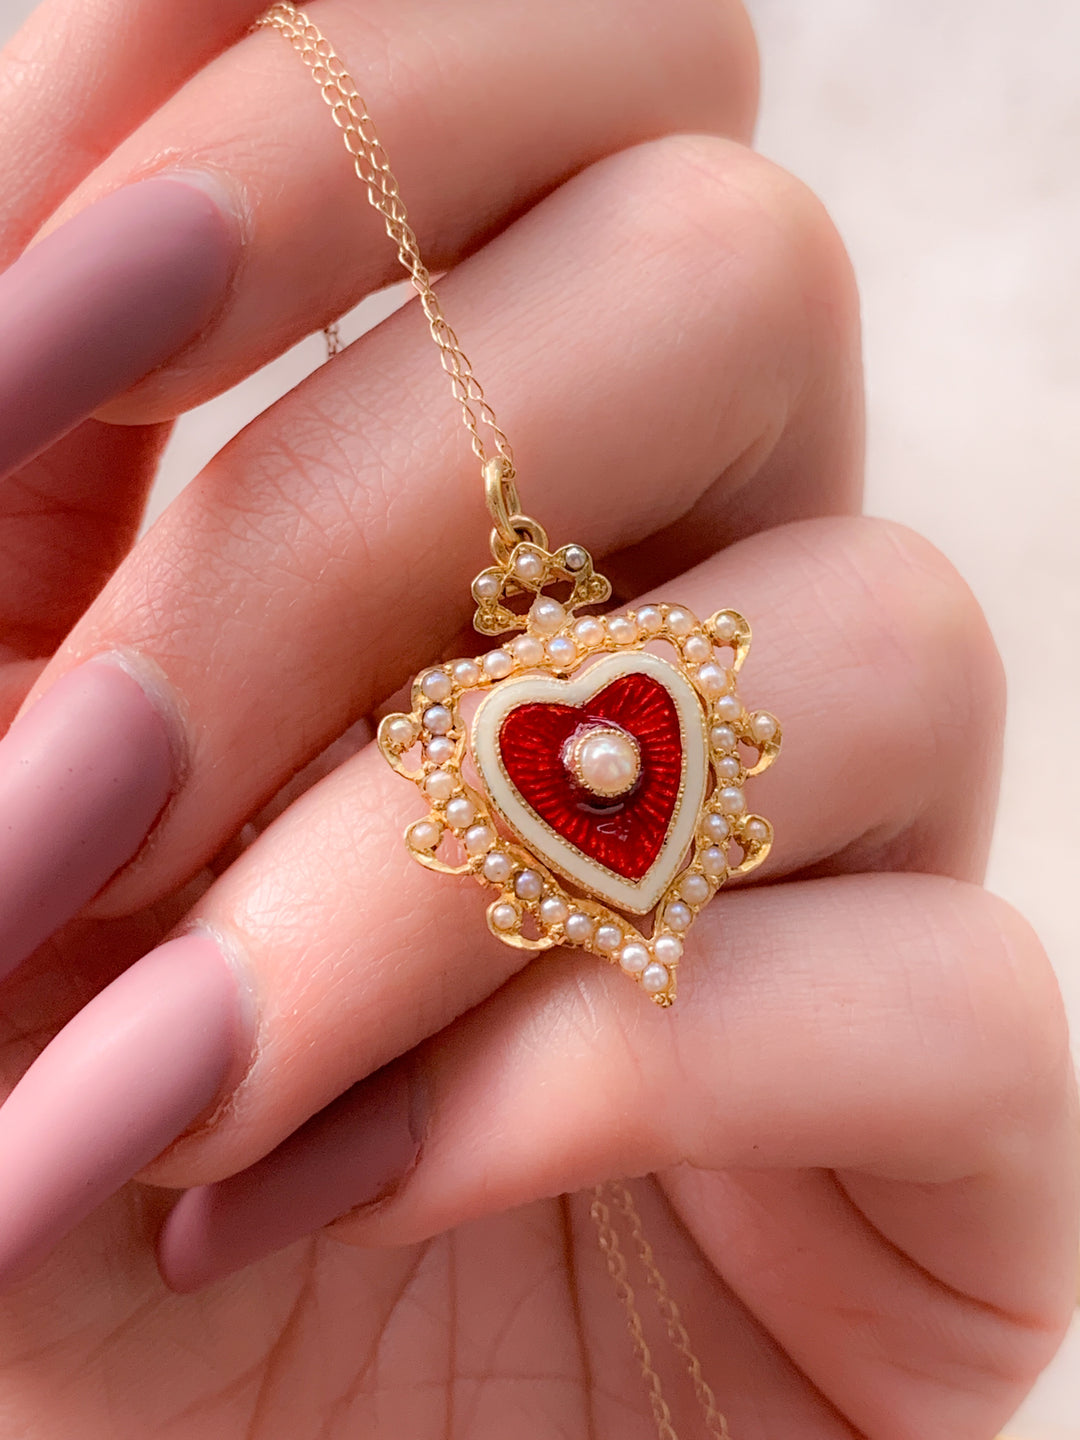 Victorian 15k Red Heart Pendant with Pearls Circa 1890 *include red ribbon*